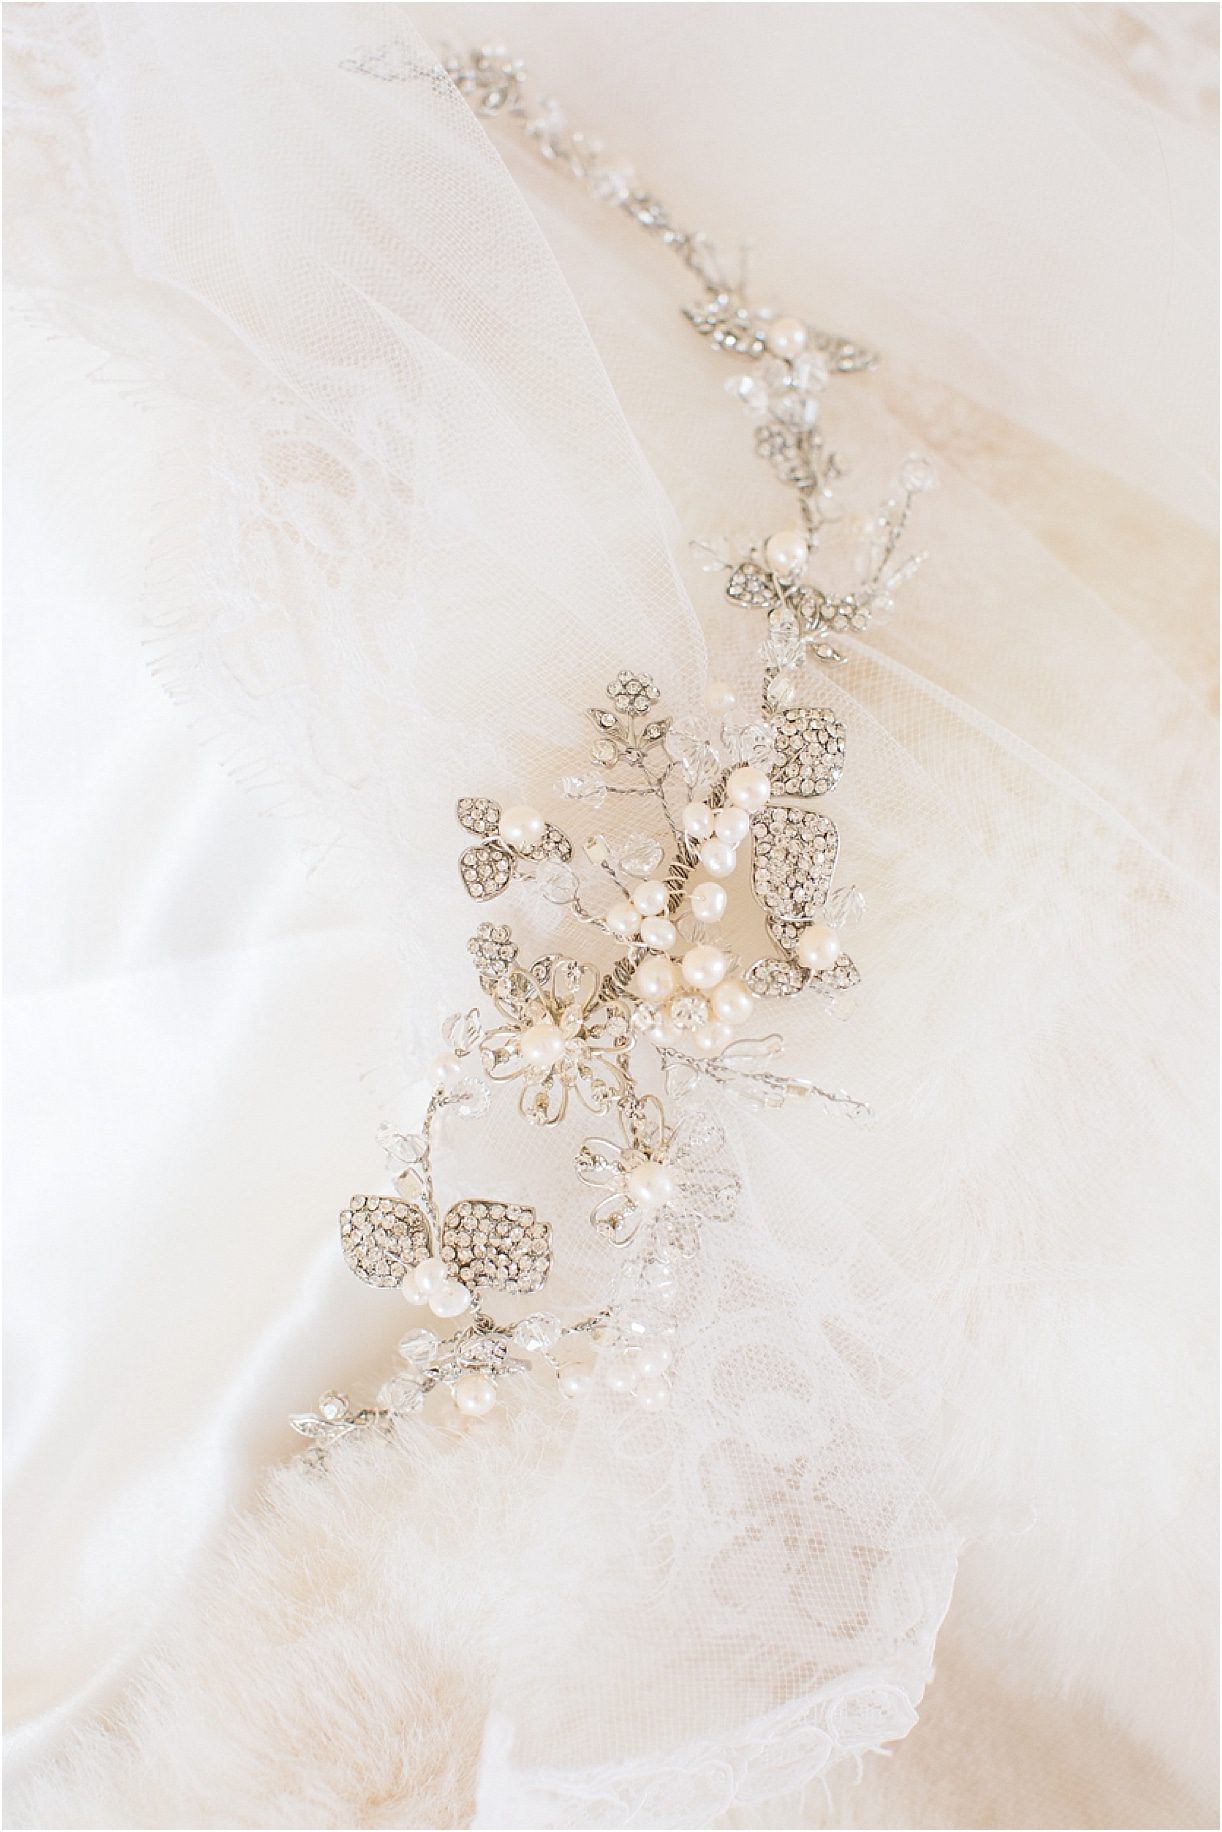 Virginia Lovely Plantation Shoot as seen on Hill City Bride Wedding Blog by Shelby Dickinson Photography Comb Hair Accessory Hairpiece